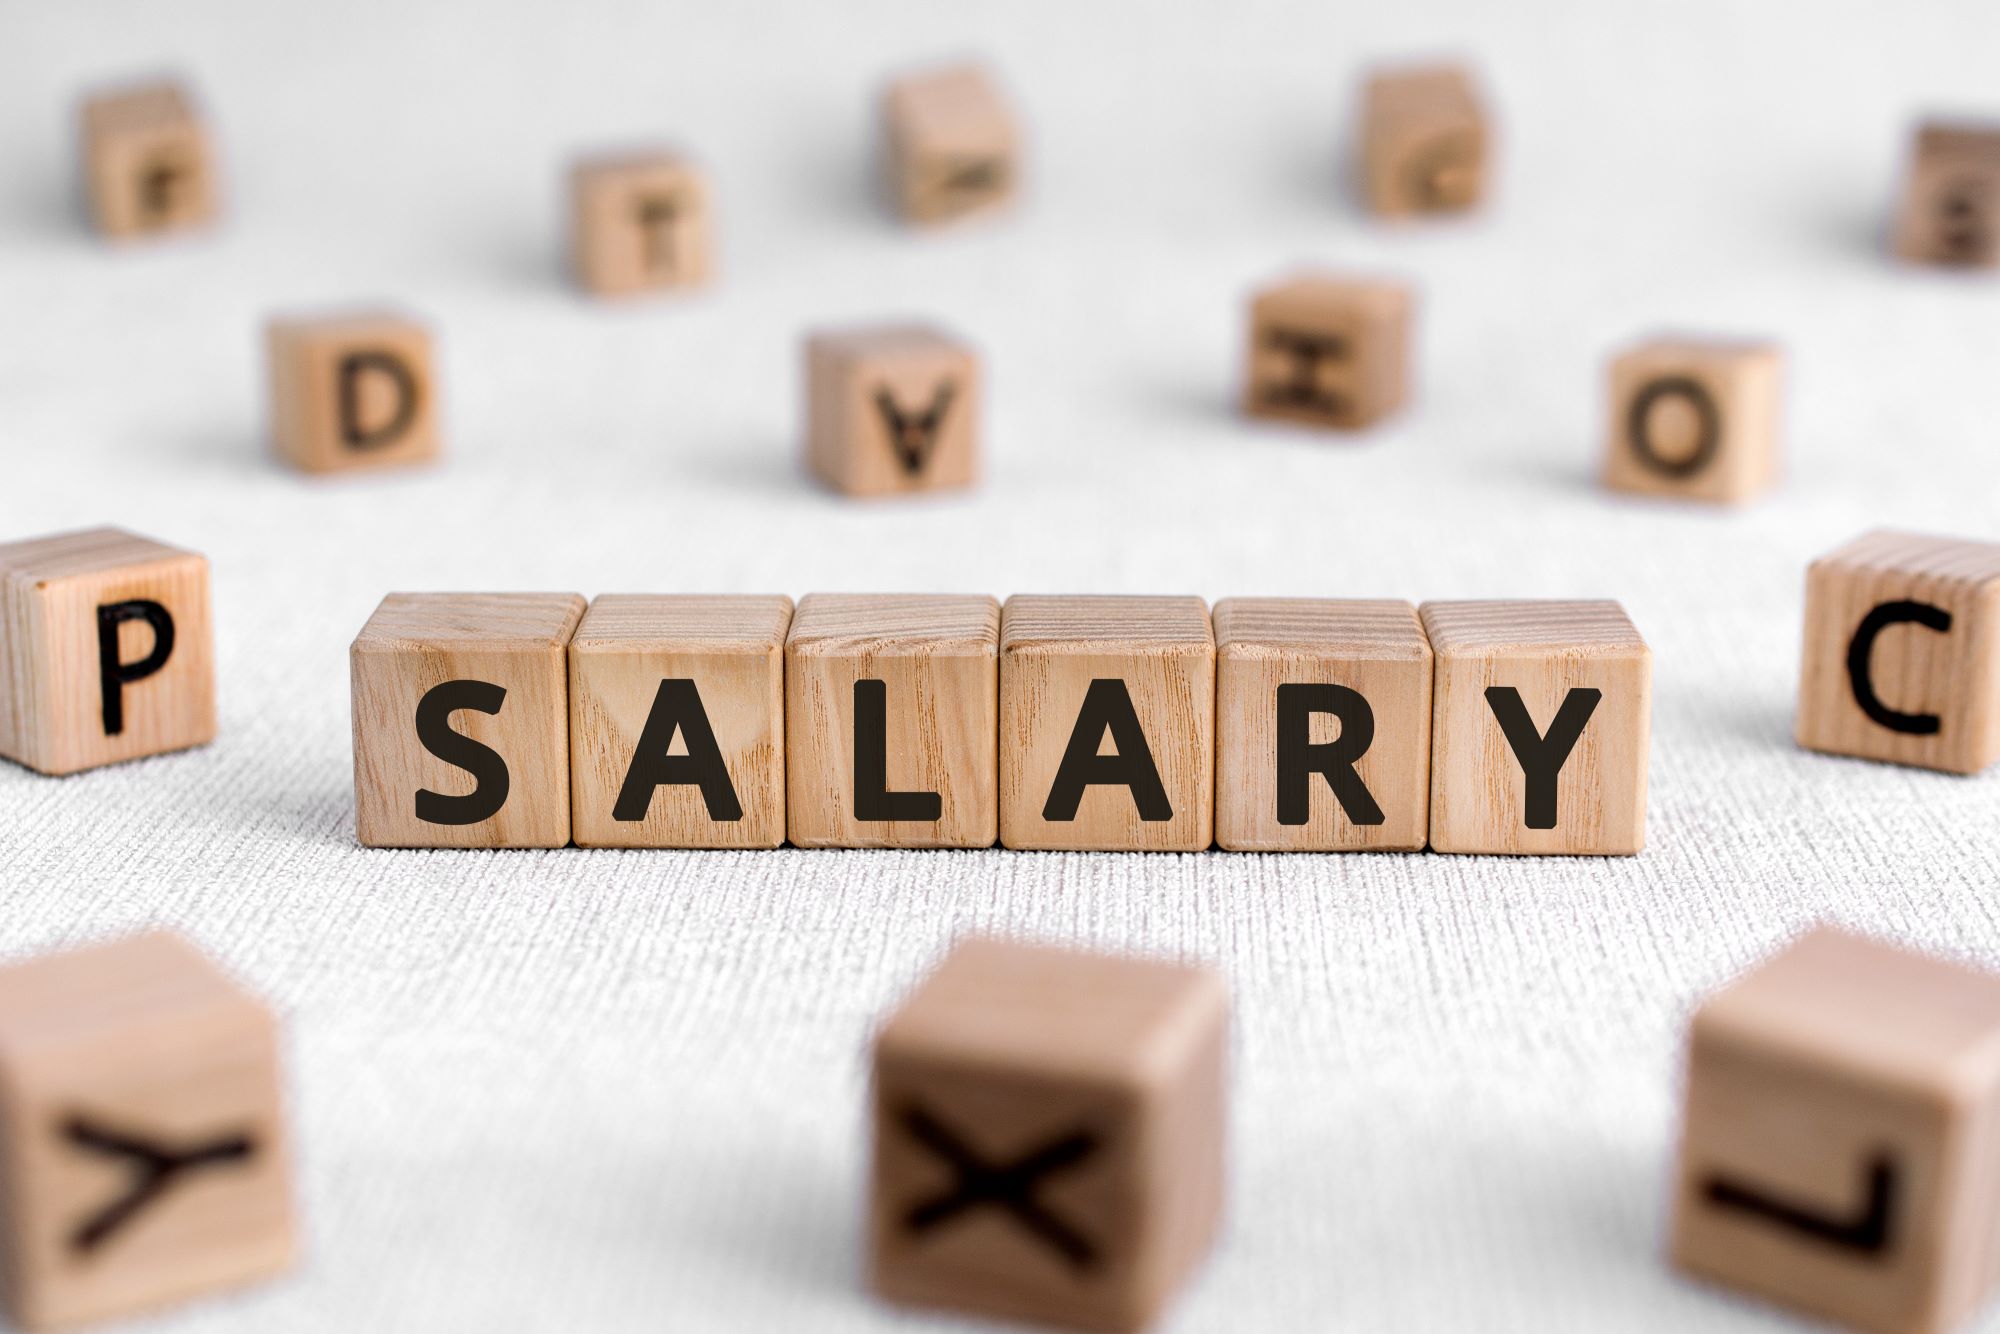 What is net salary? What should employees pay attention to to avoid losses when receiving net salary?